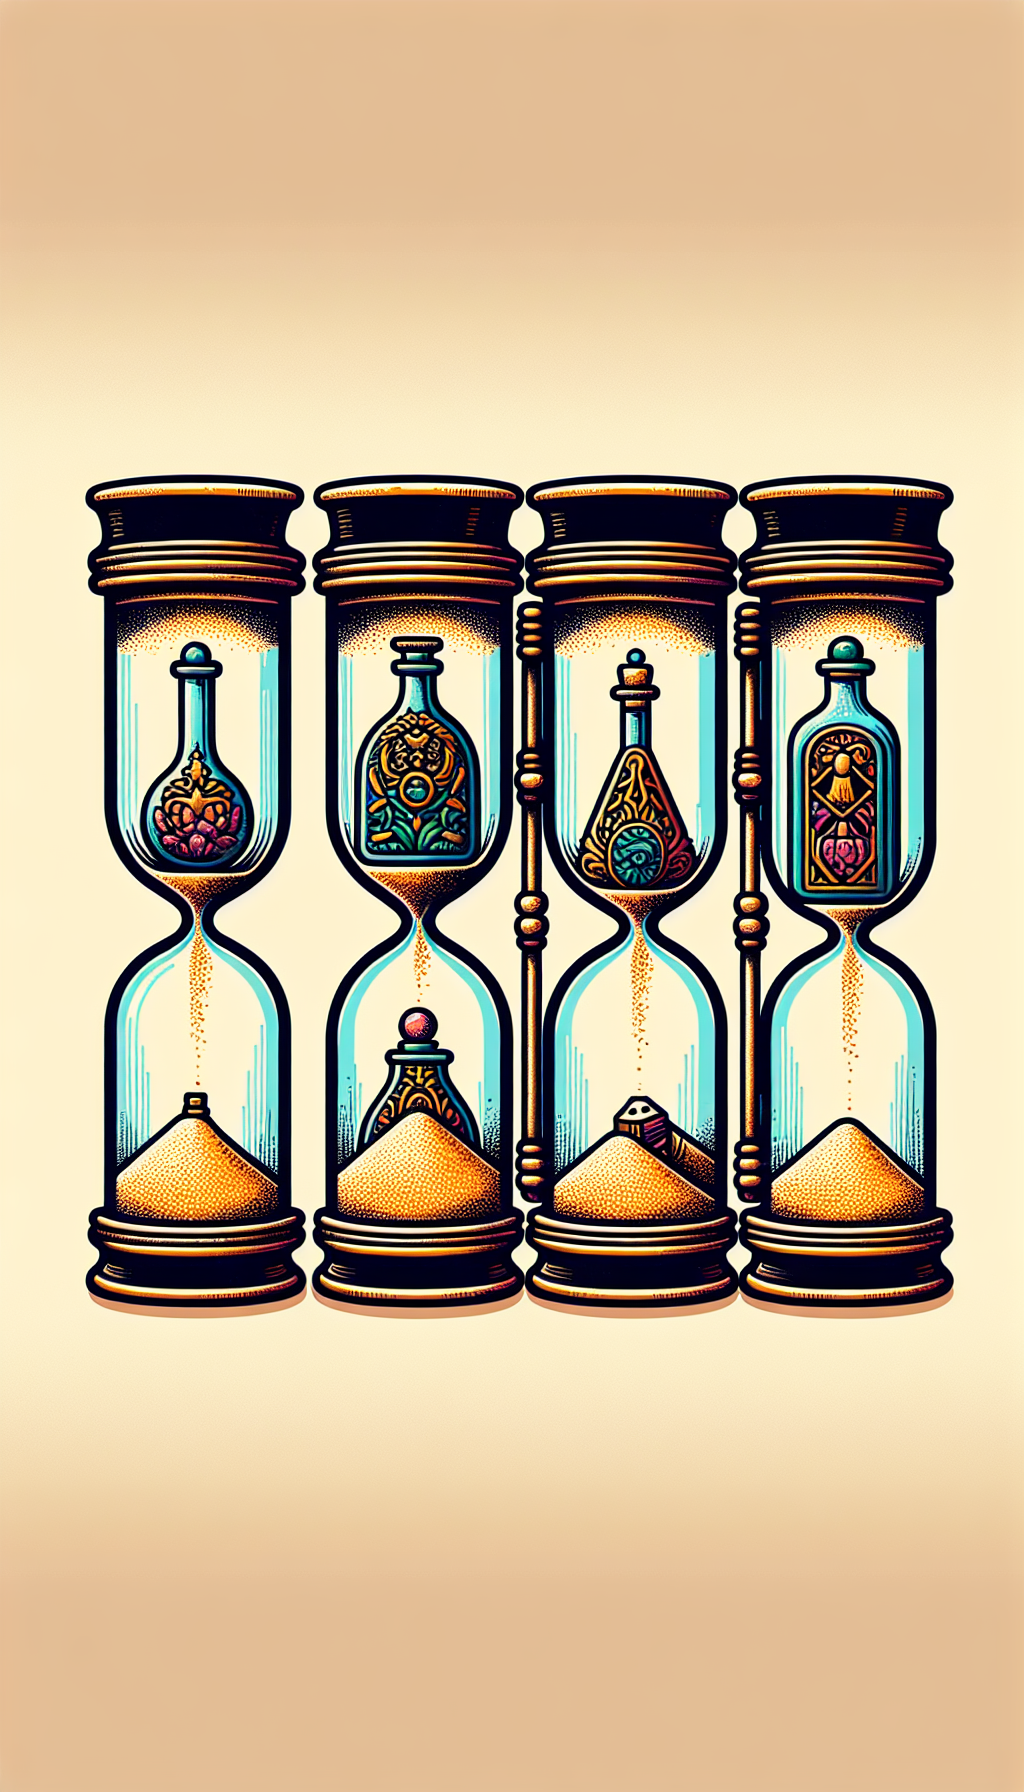 An illustration depicts a whimsical hourglass, with each segmented chamber shaped as an iconic bottle from different historical eras: Victorian, Art Deco, etc. Fine lines and radiant colors differentiate each section's style. Inside, instead of sand, miniature treasures representing the era's culture flow through, highlighting the intrinsic value of antique bottles across time.